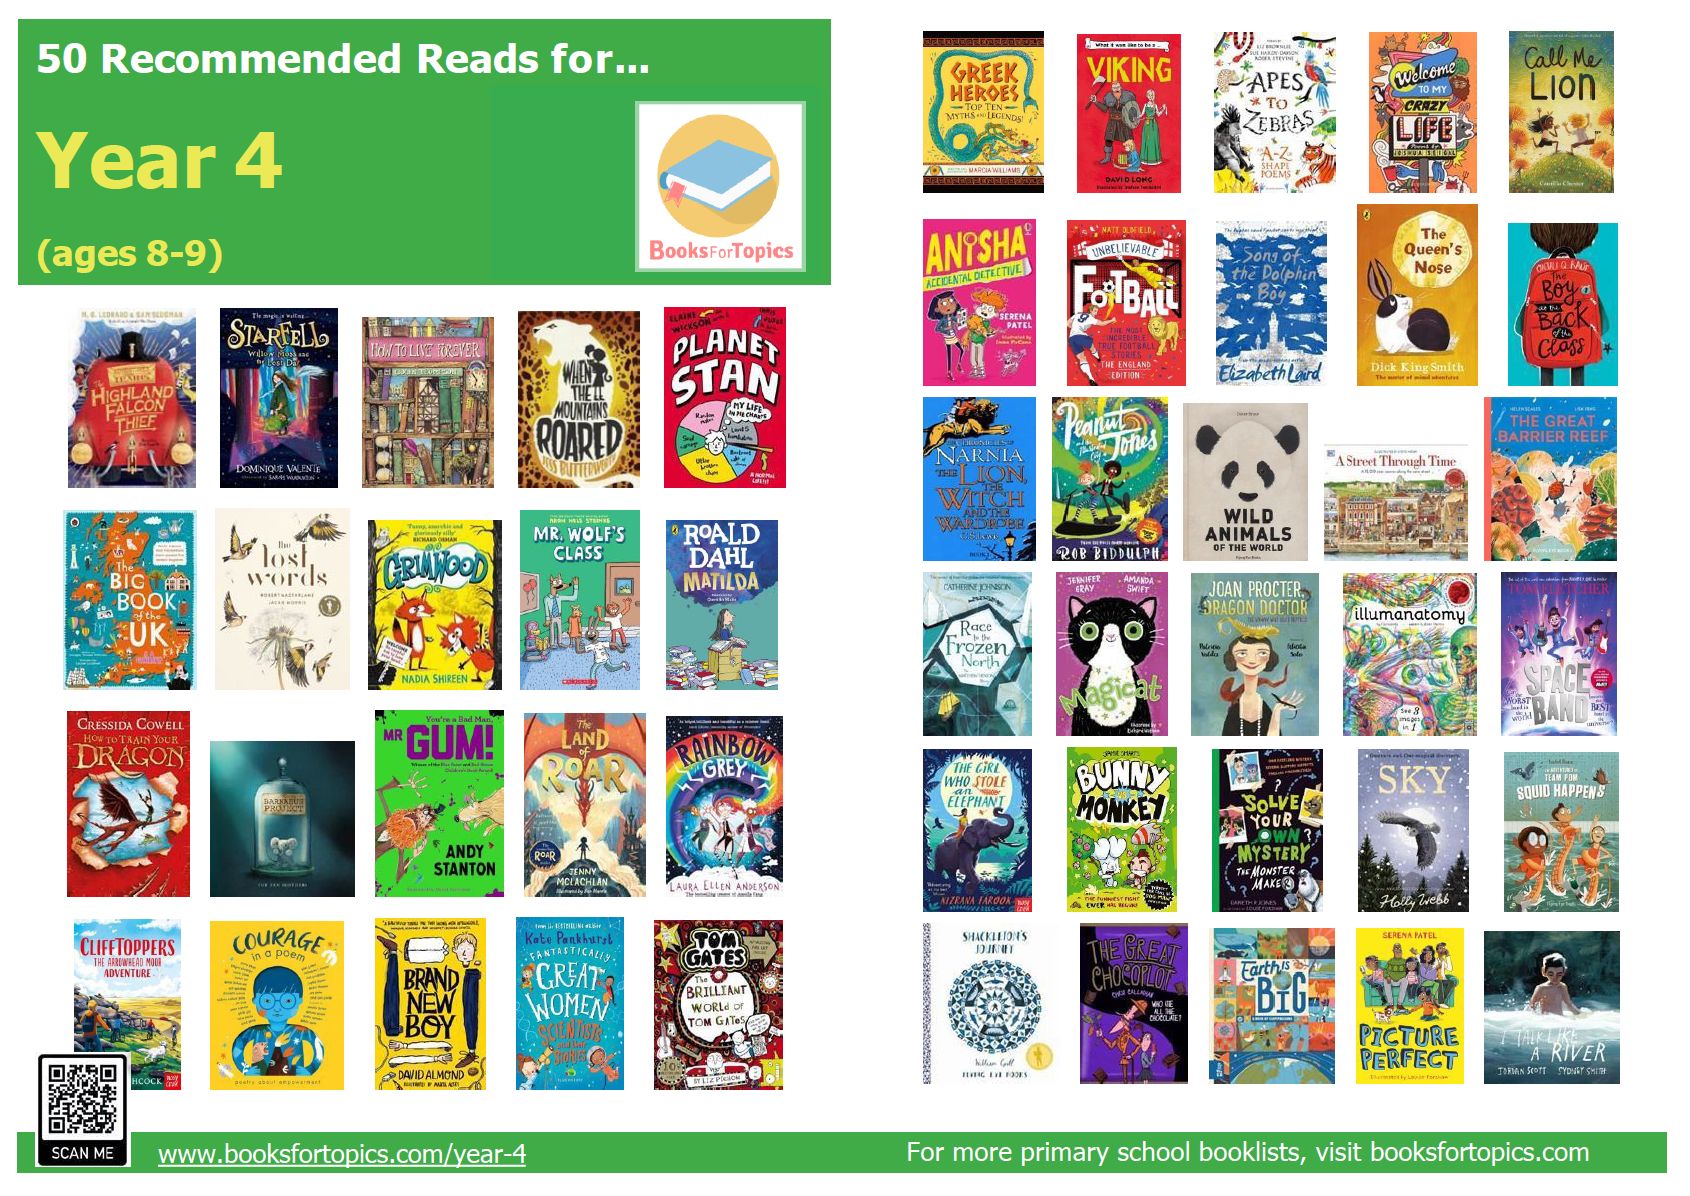 y4 recommended reading list poster